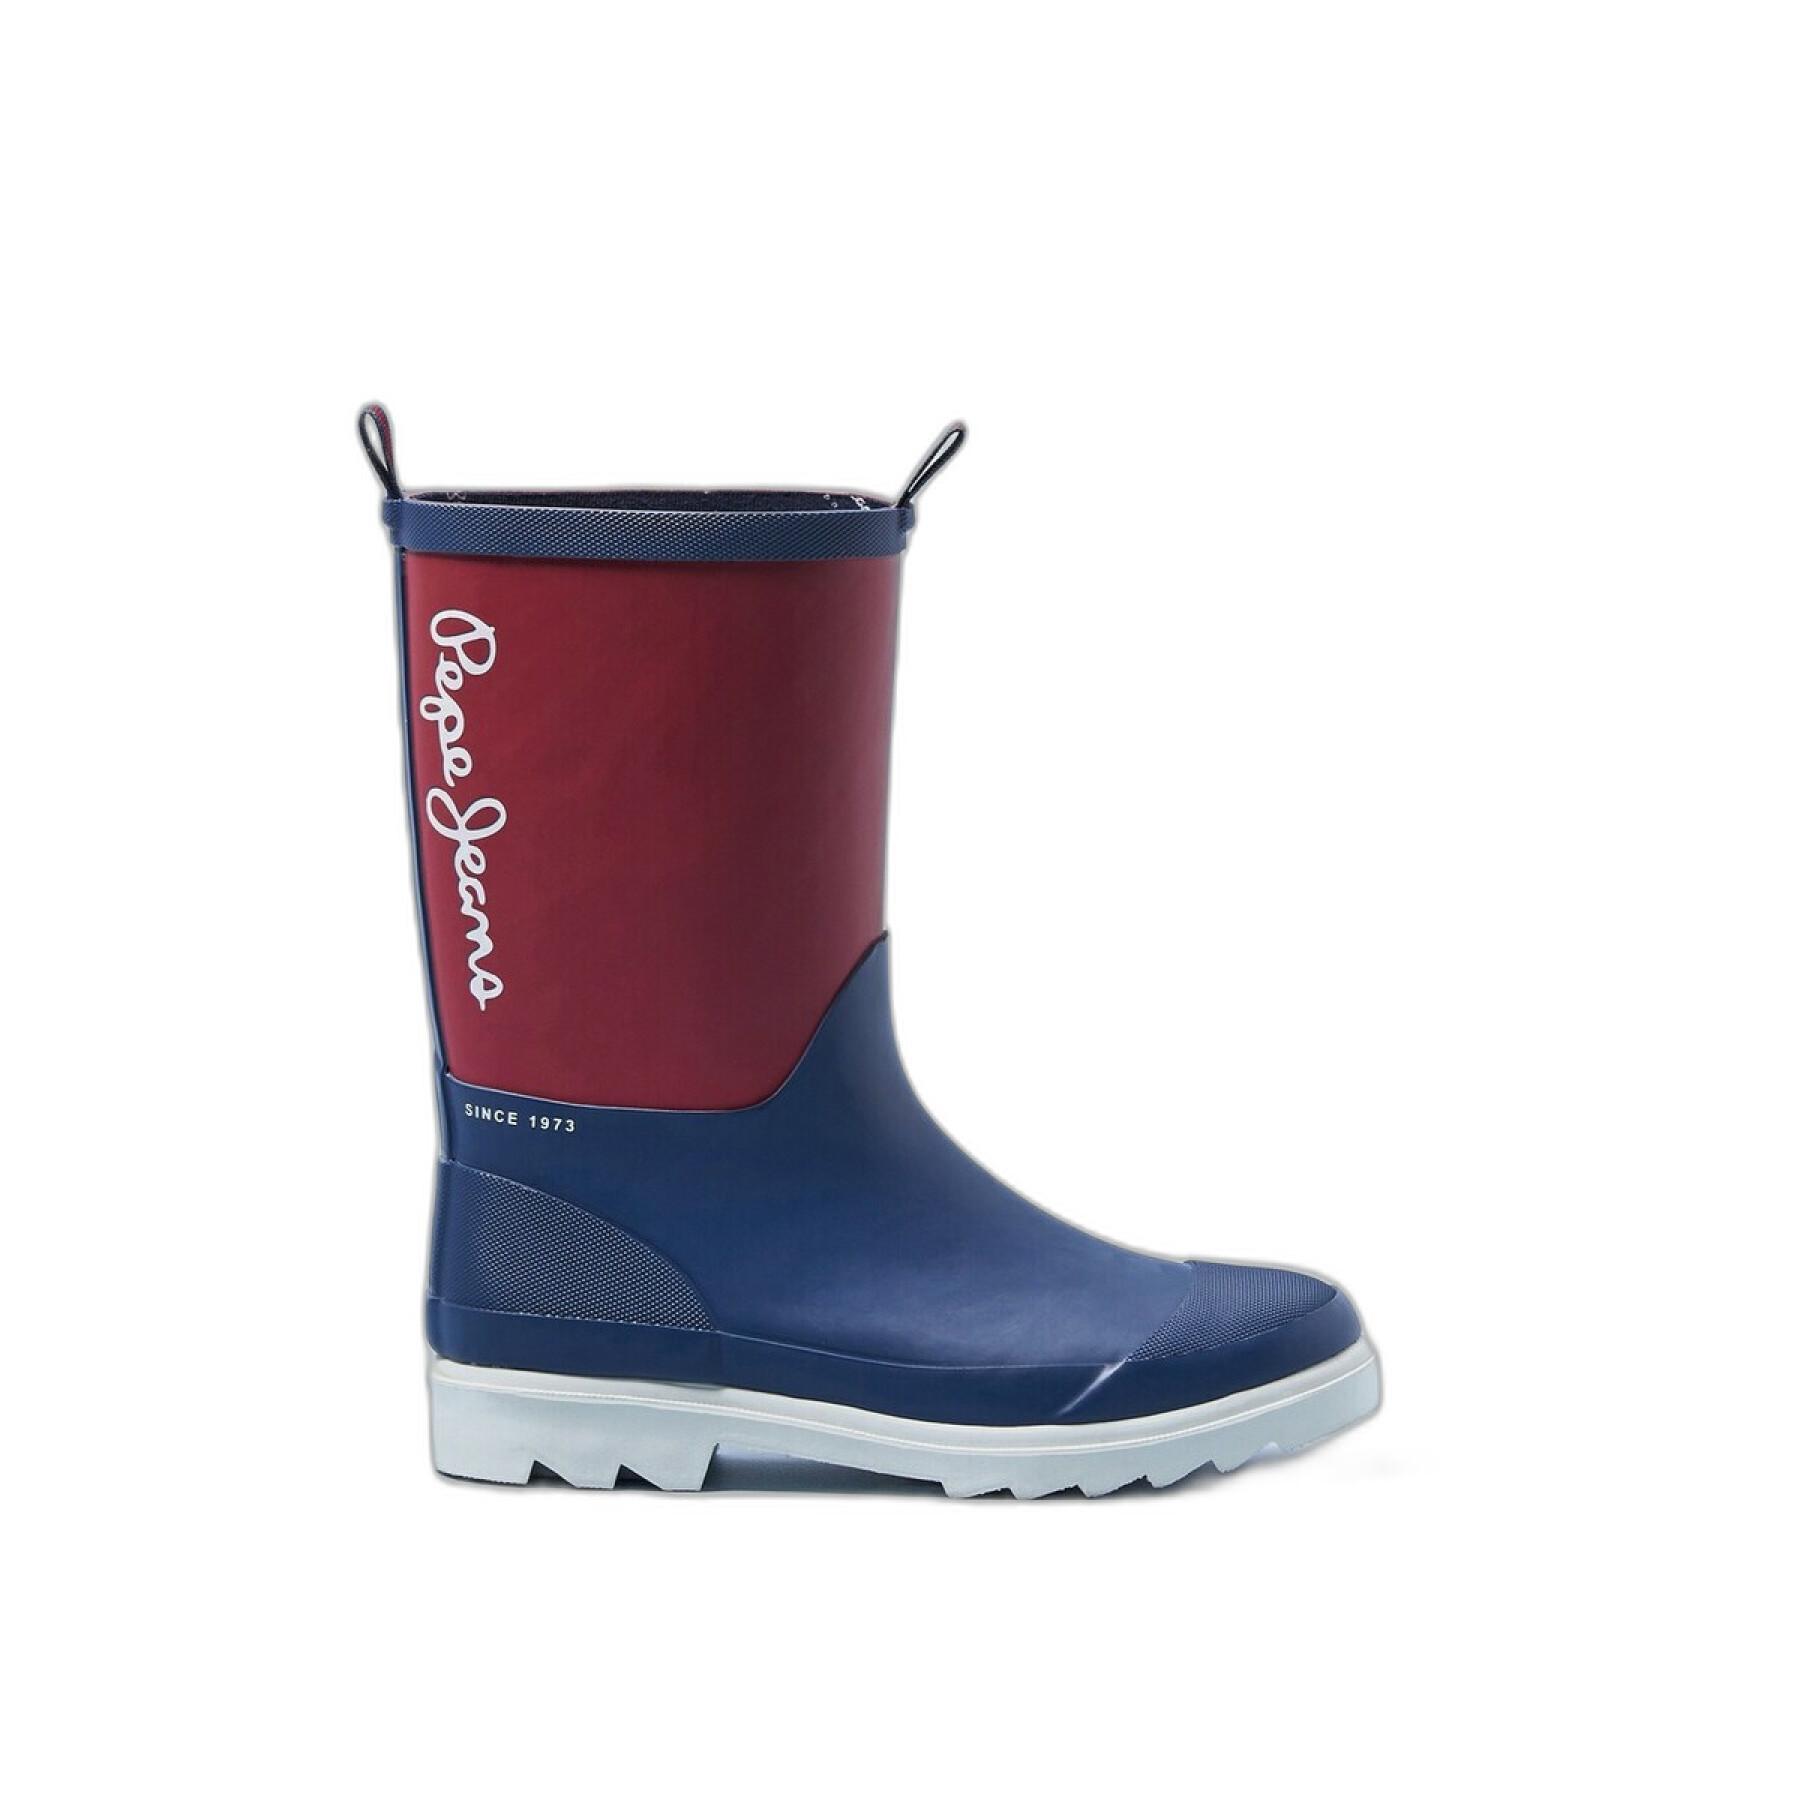 Children's boots Pepe Jeans Storm Basic